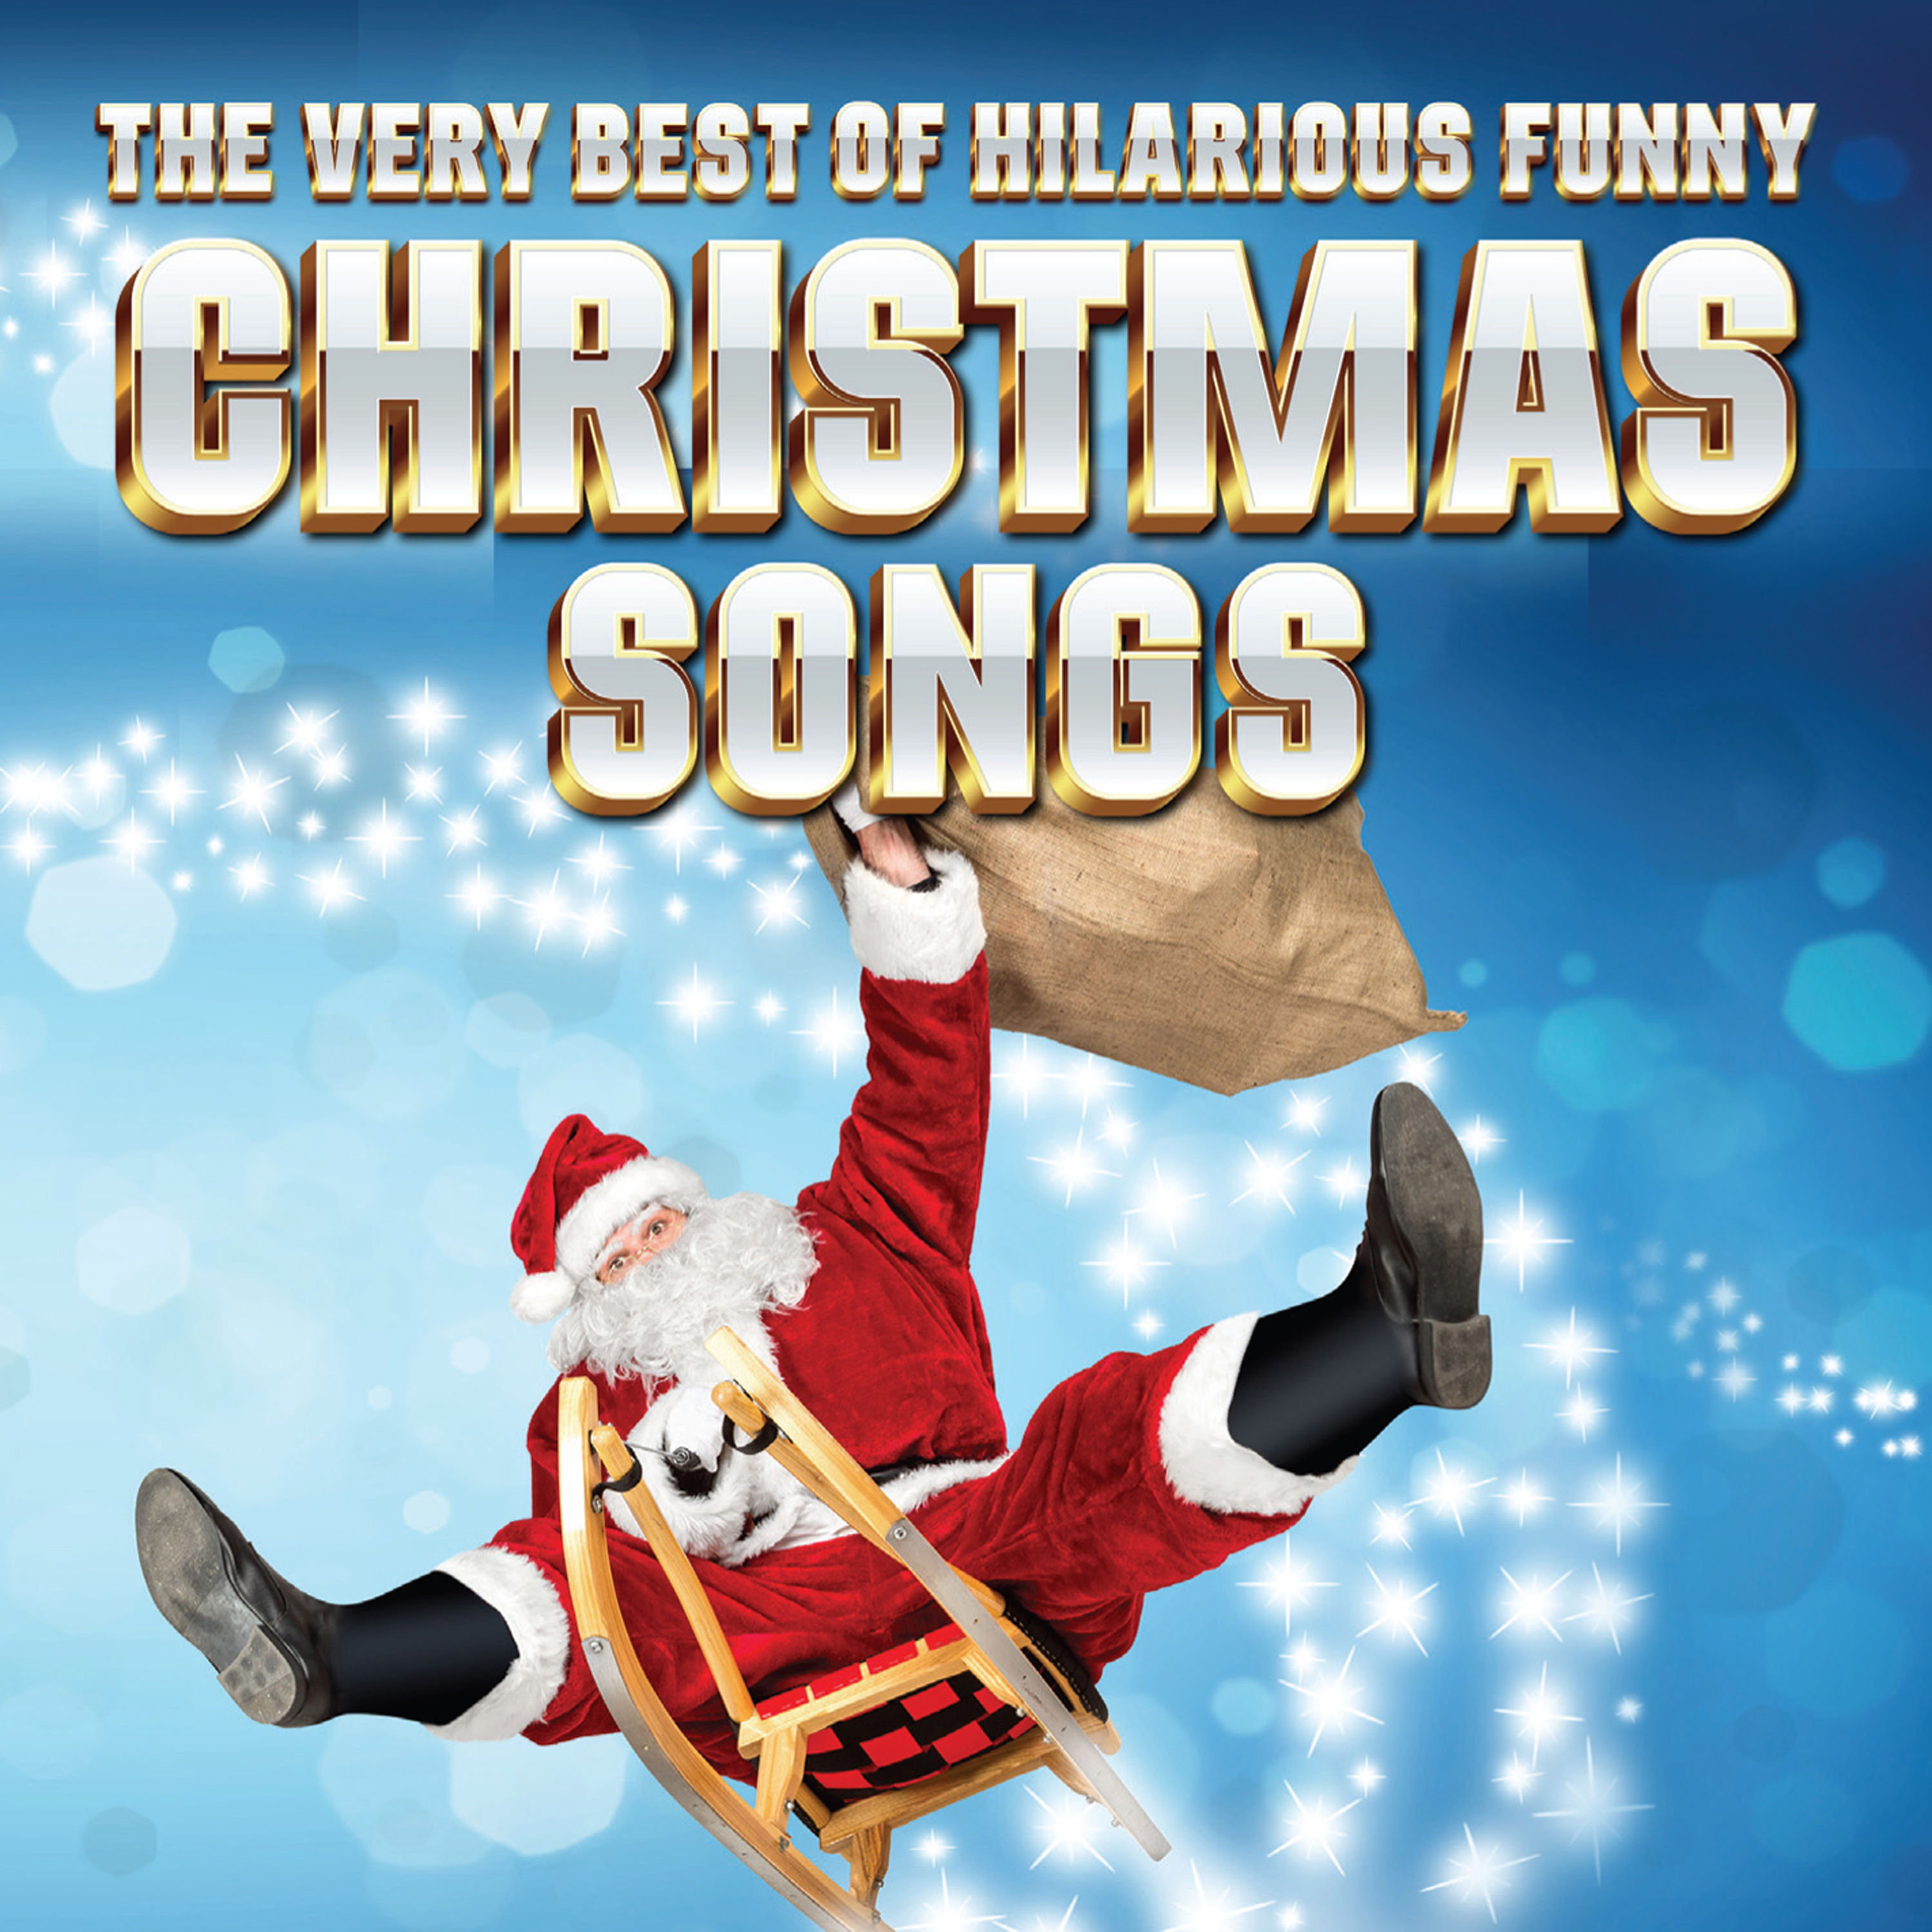 The Very Best Of Hilarious Funny Christmas Songs